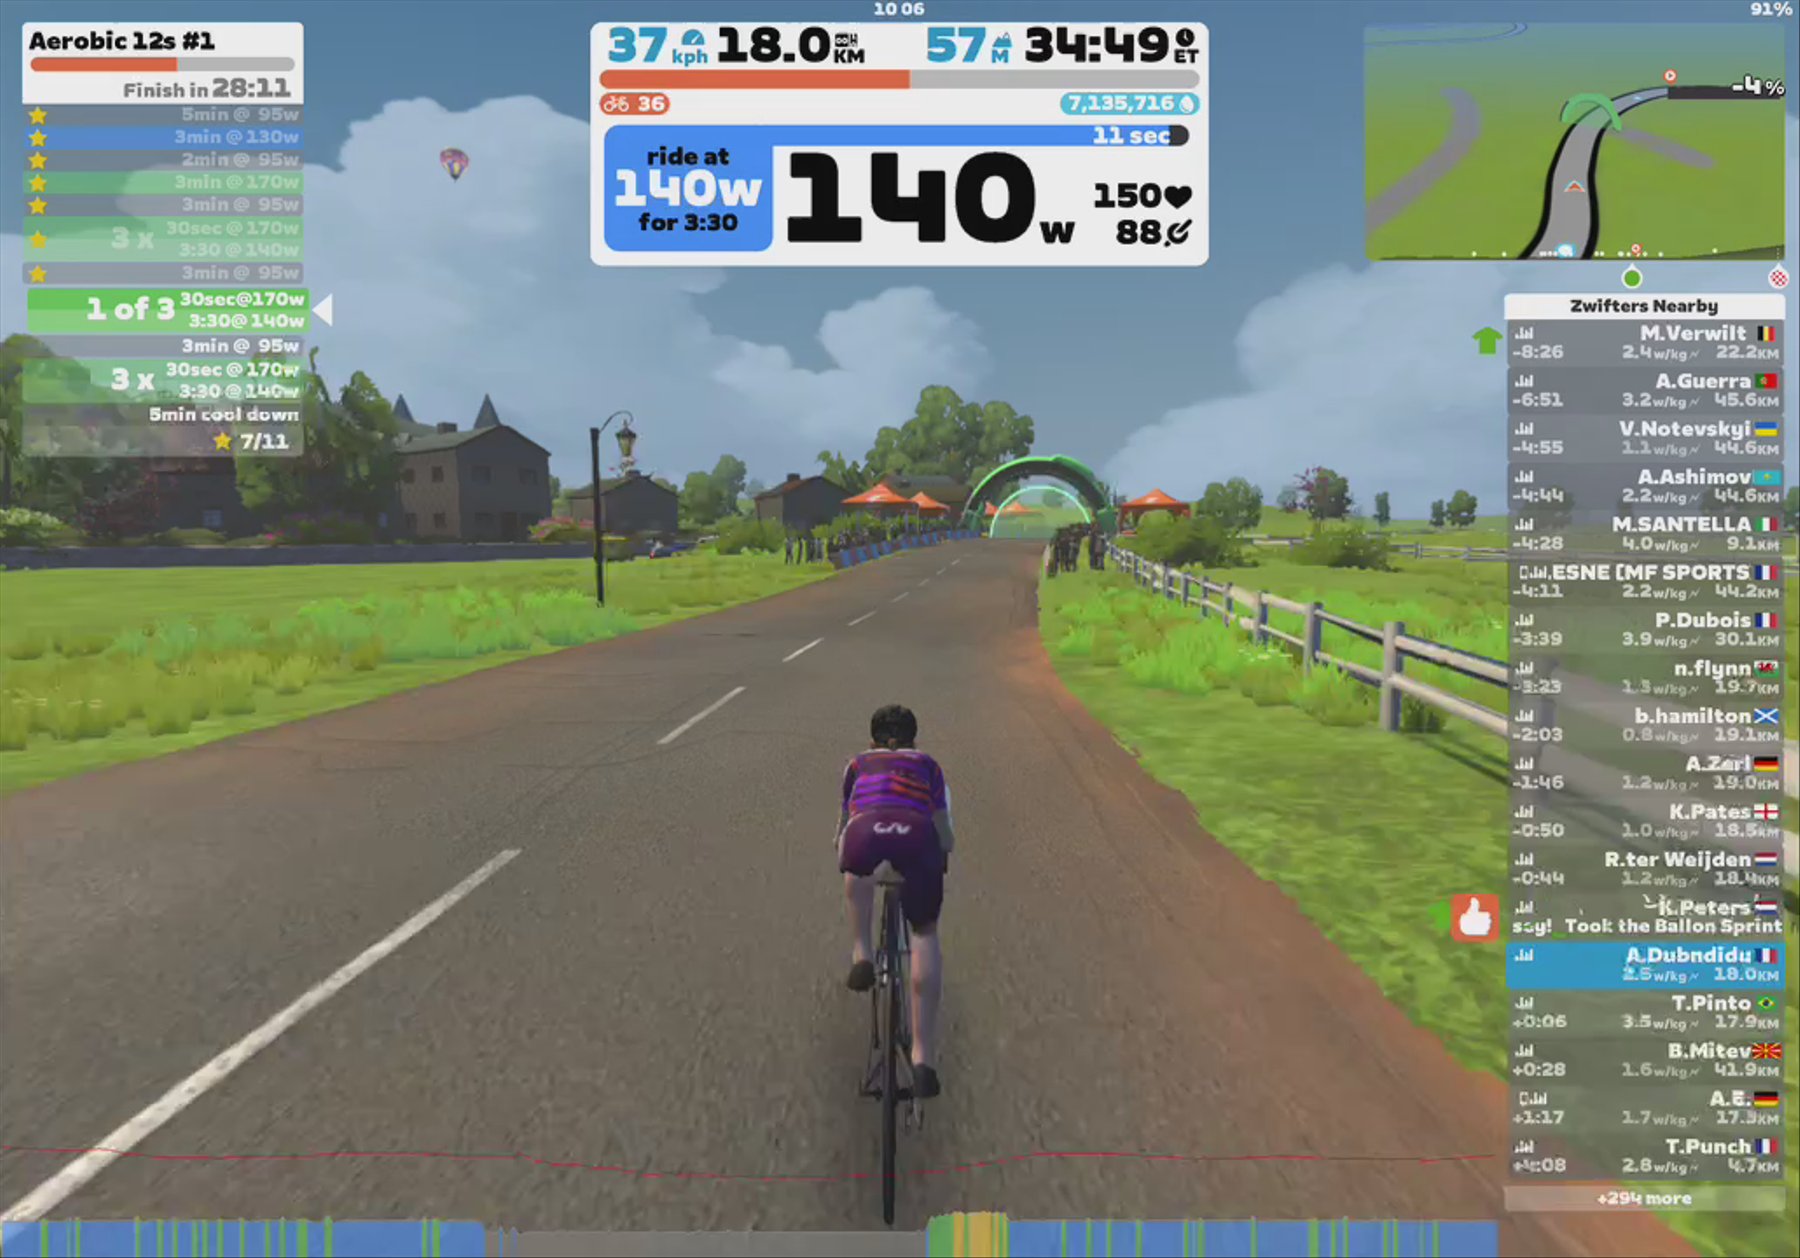 Zwift - Aerobic 12s #1 in France